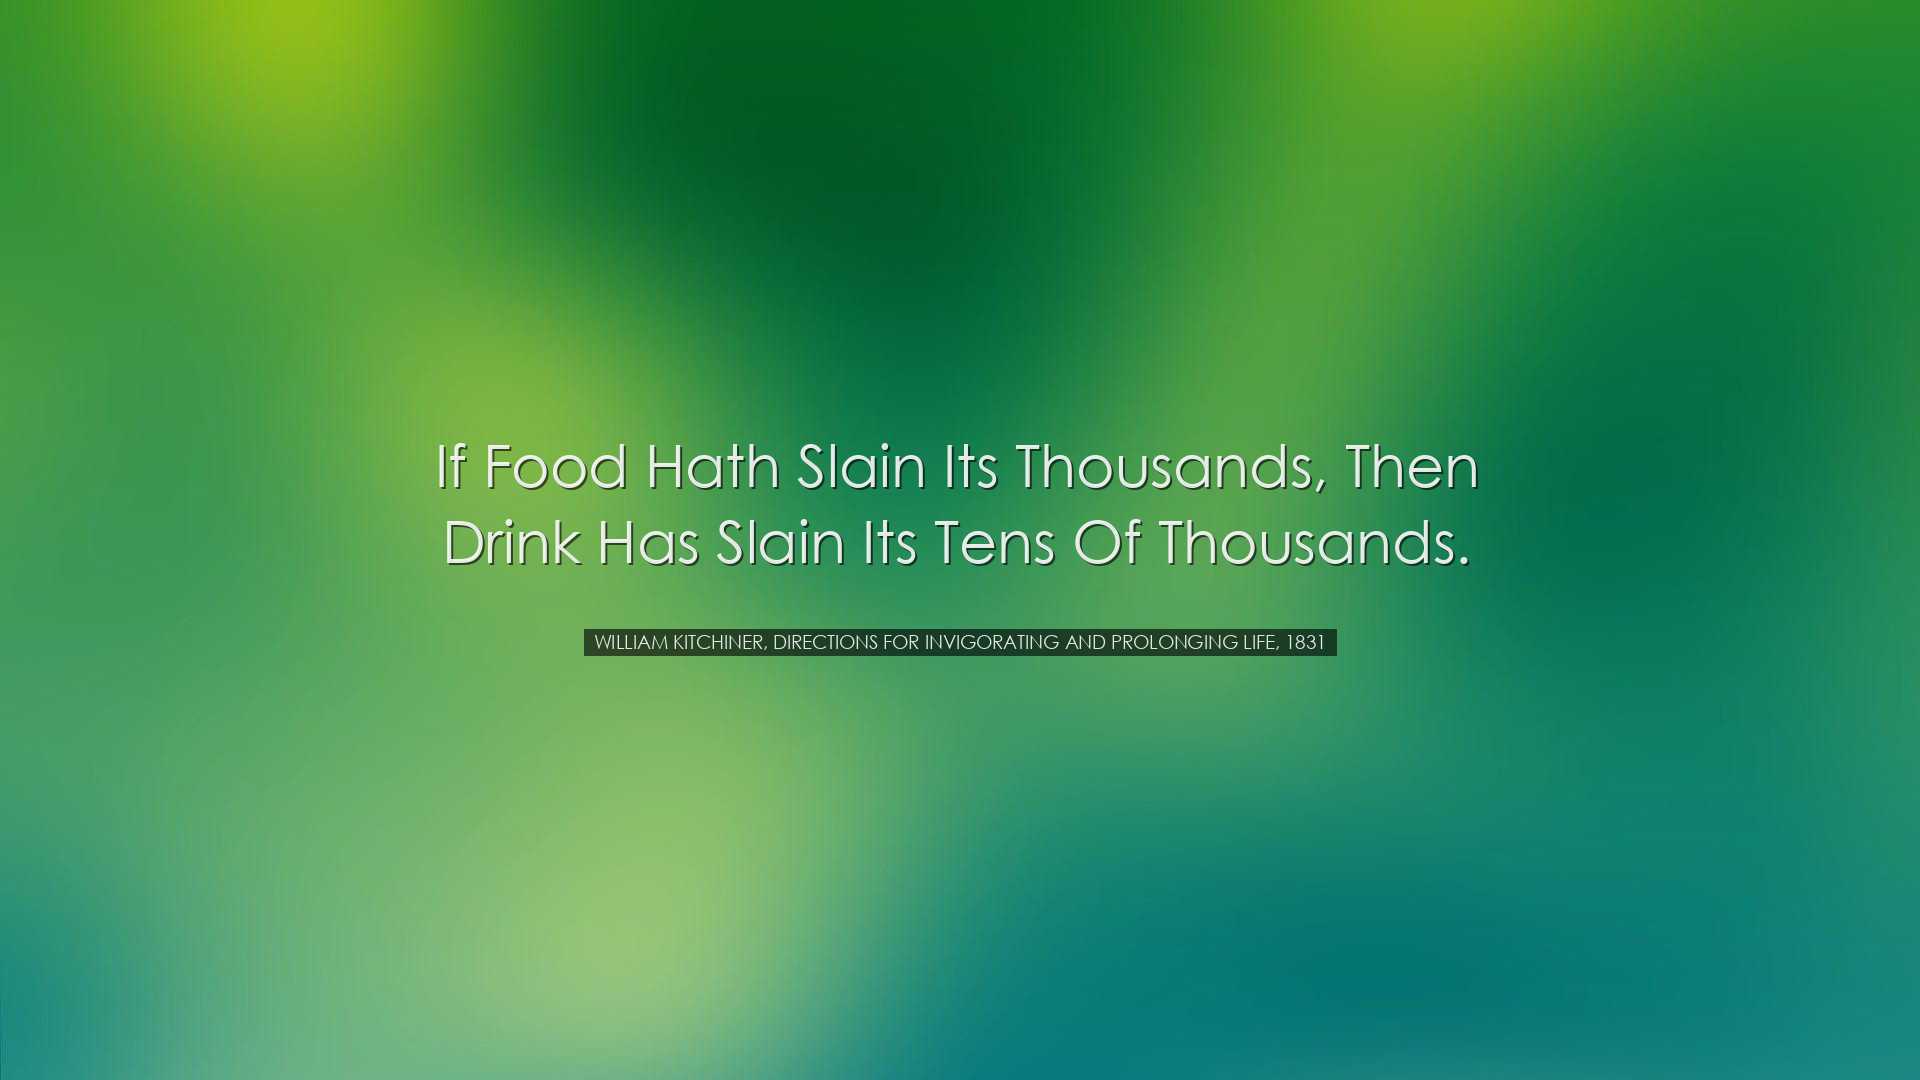 If food hath slain its thousands, then drink has slain its tens of